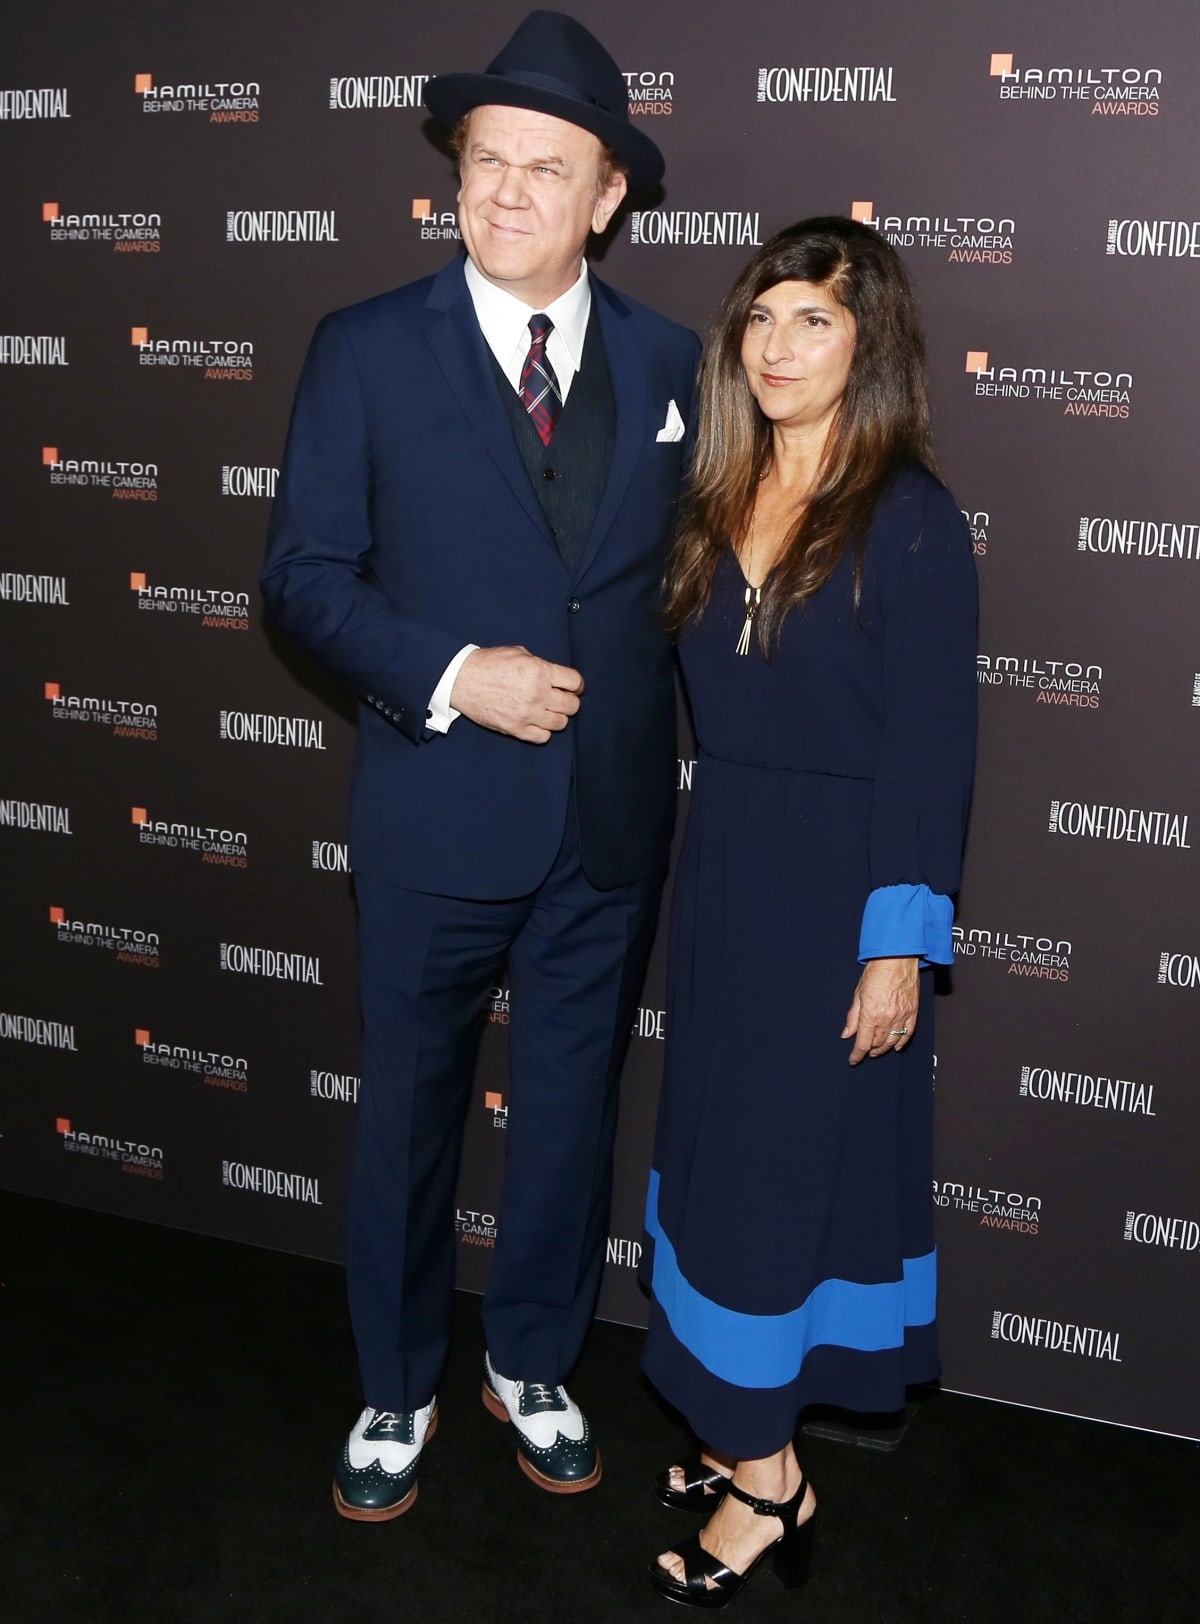 John C. Reilly and Alison Dickey in matching blue ensembles at the Hamilton Behind the Camera Awards presented by Los Angeles Confidential Magazine